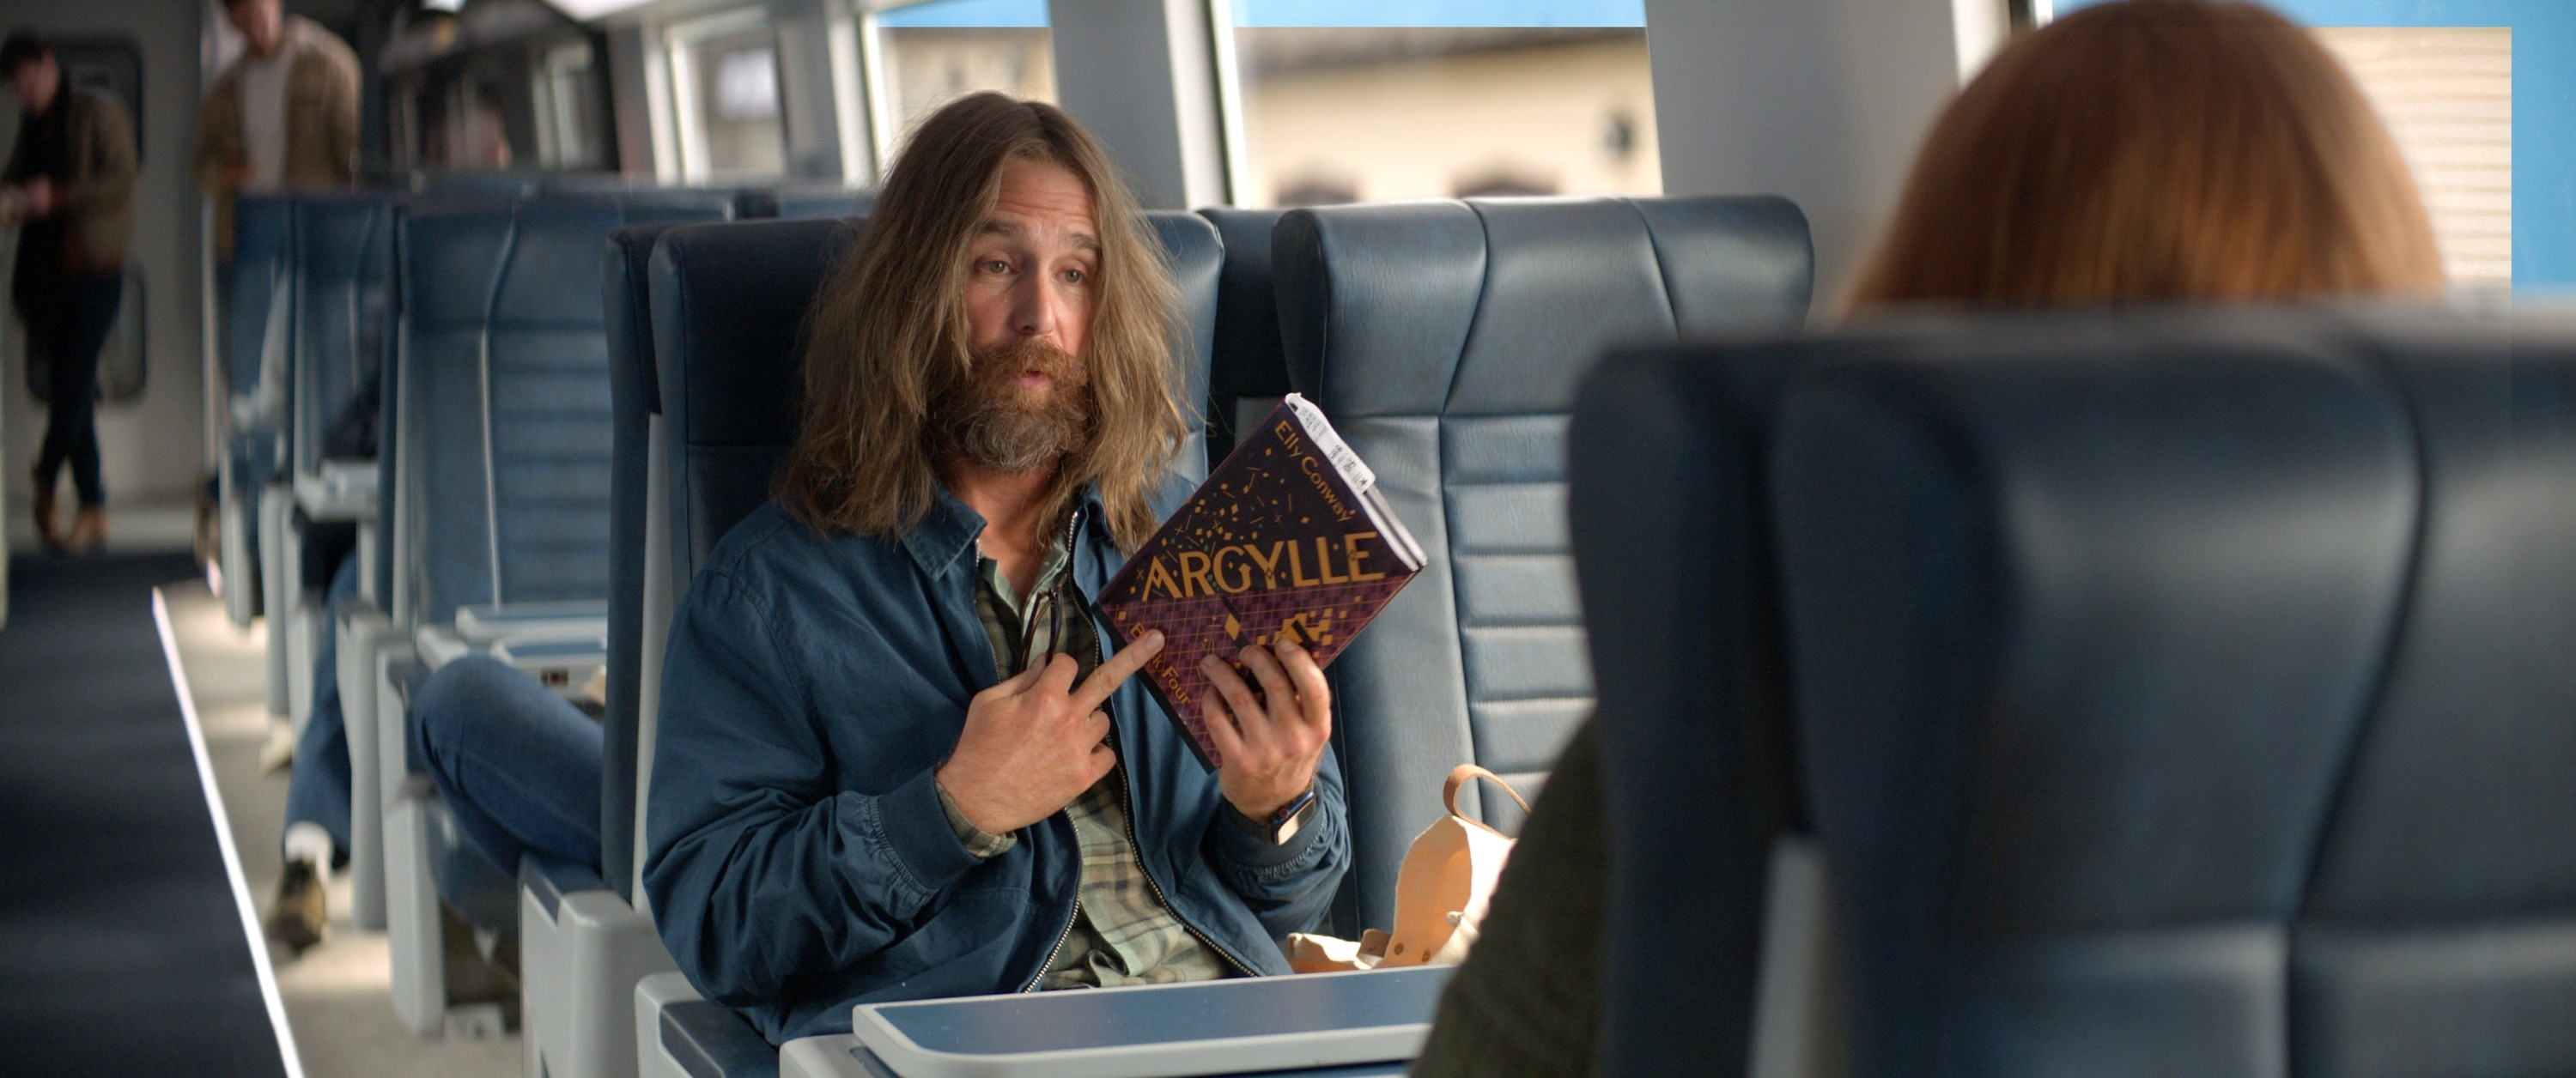 A man with long hair, a beard, and a mustache sitting on a train and holding a copy of Argylle